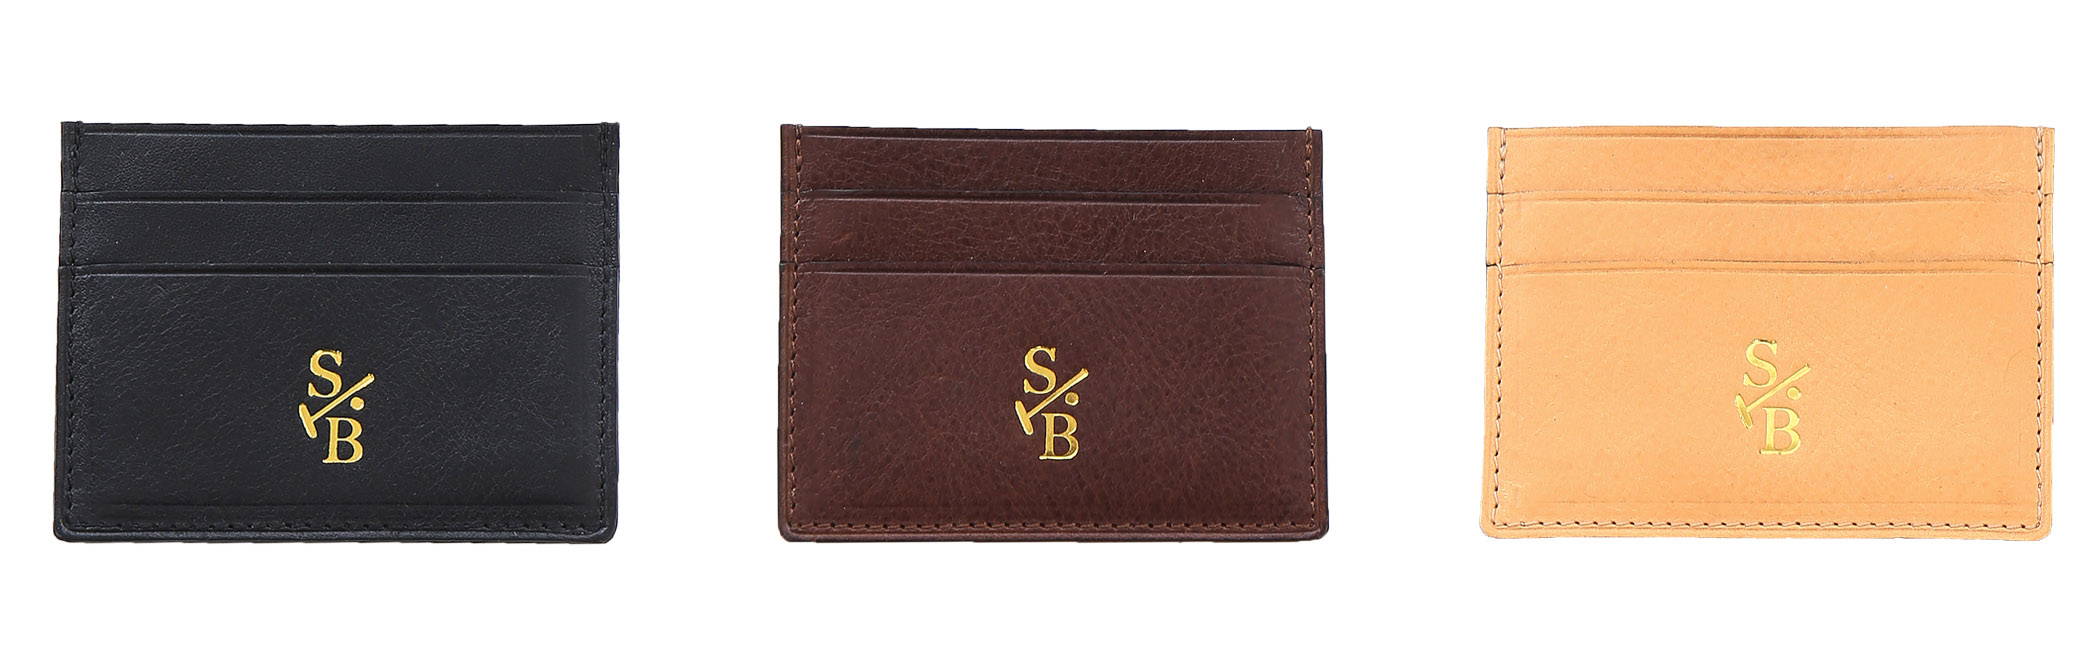 Display of vegetable-tanned leather flat wallets - Stick & Ball